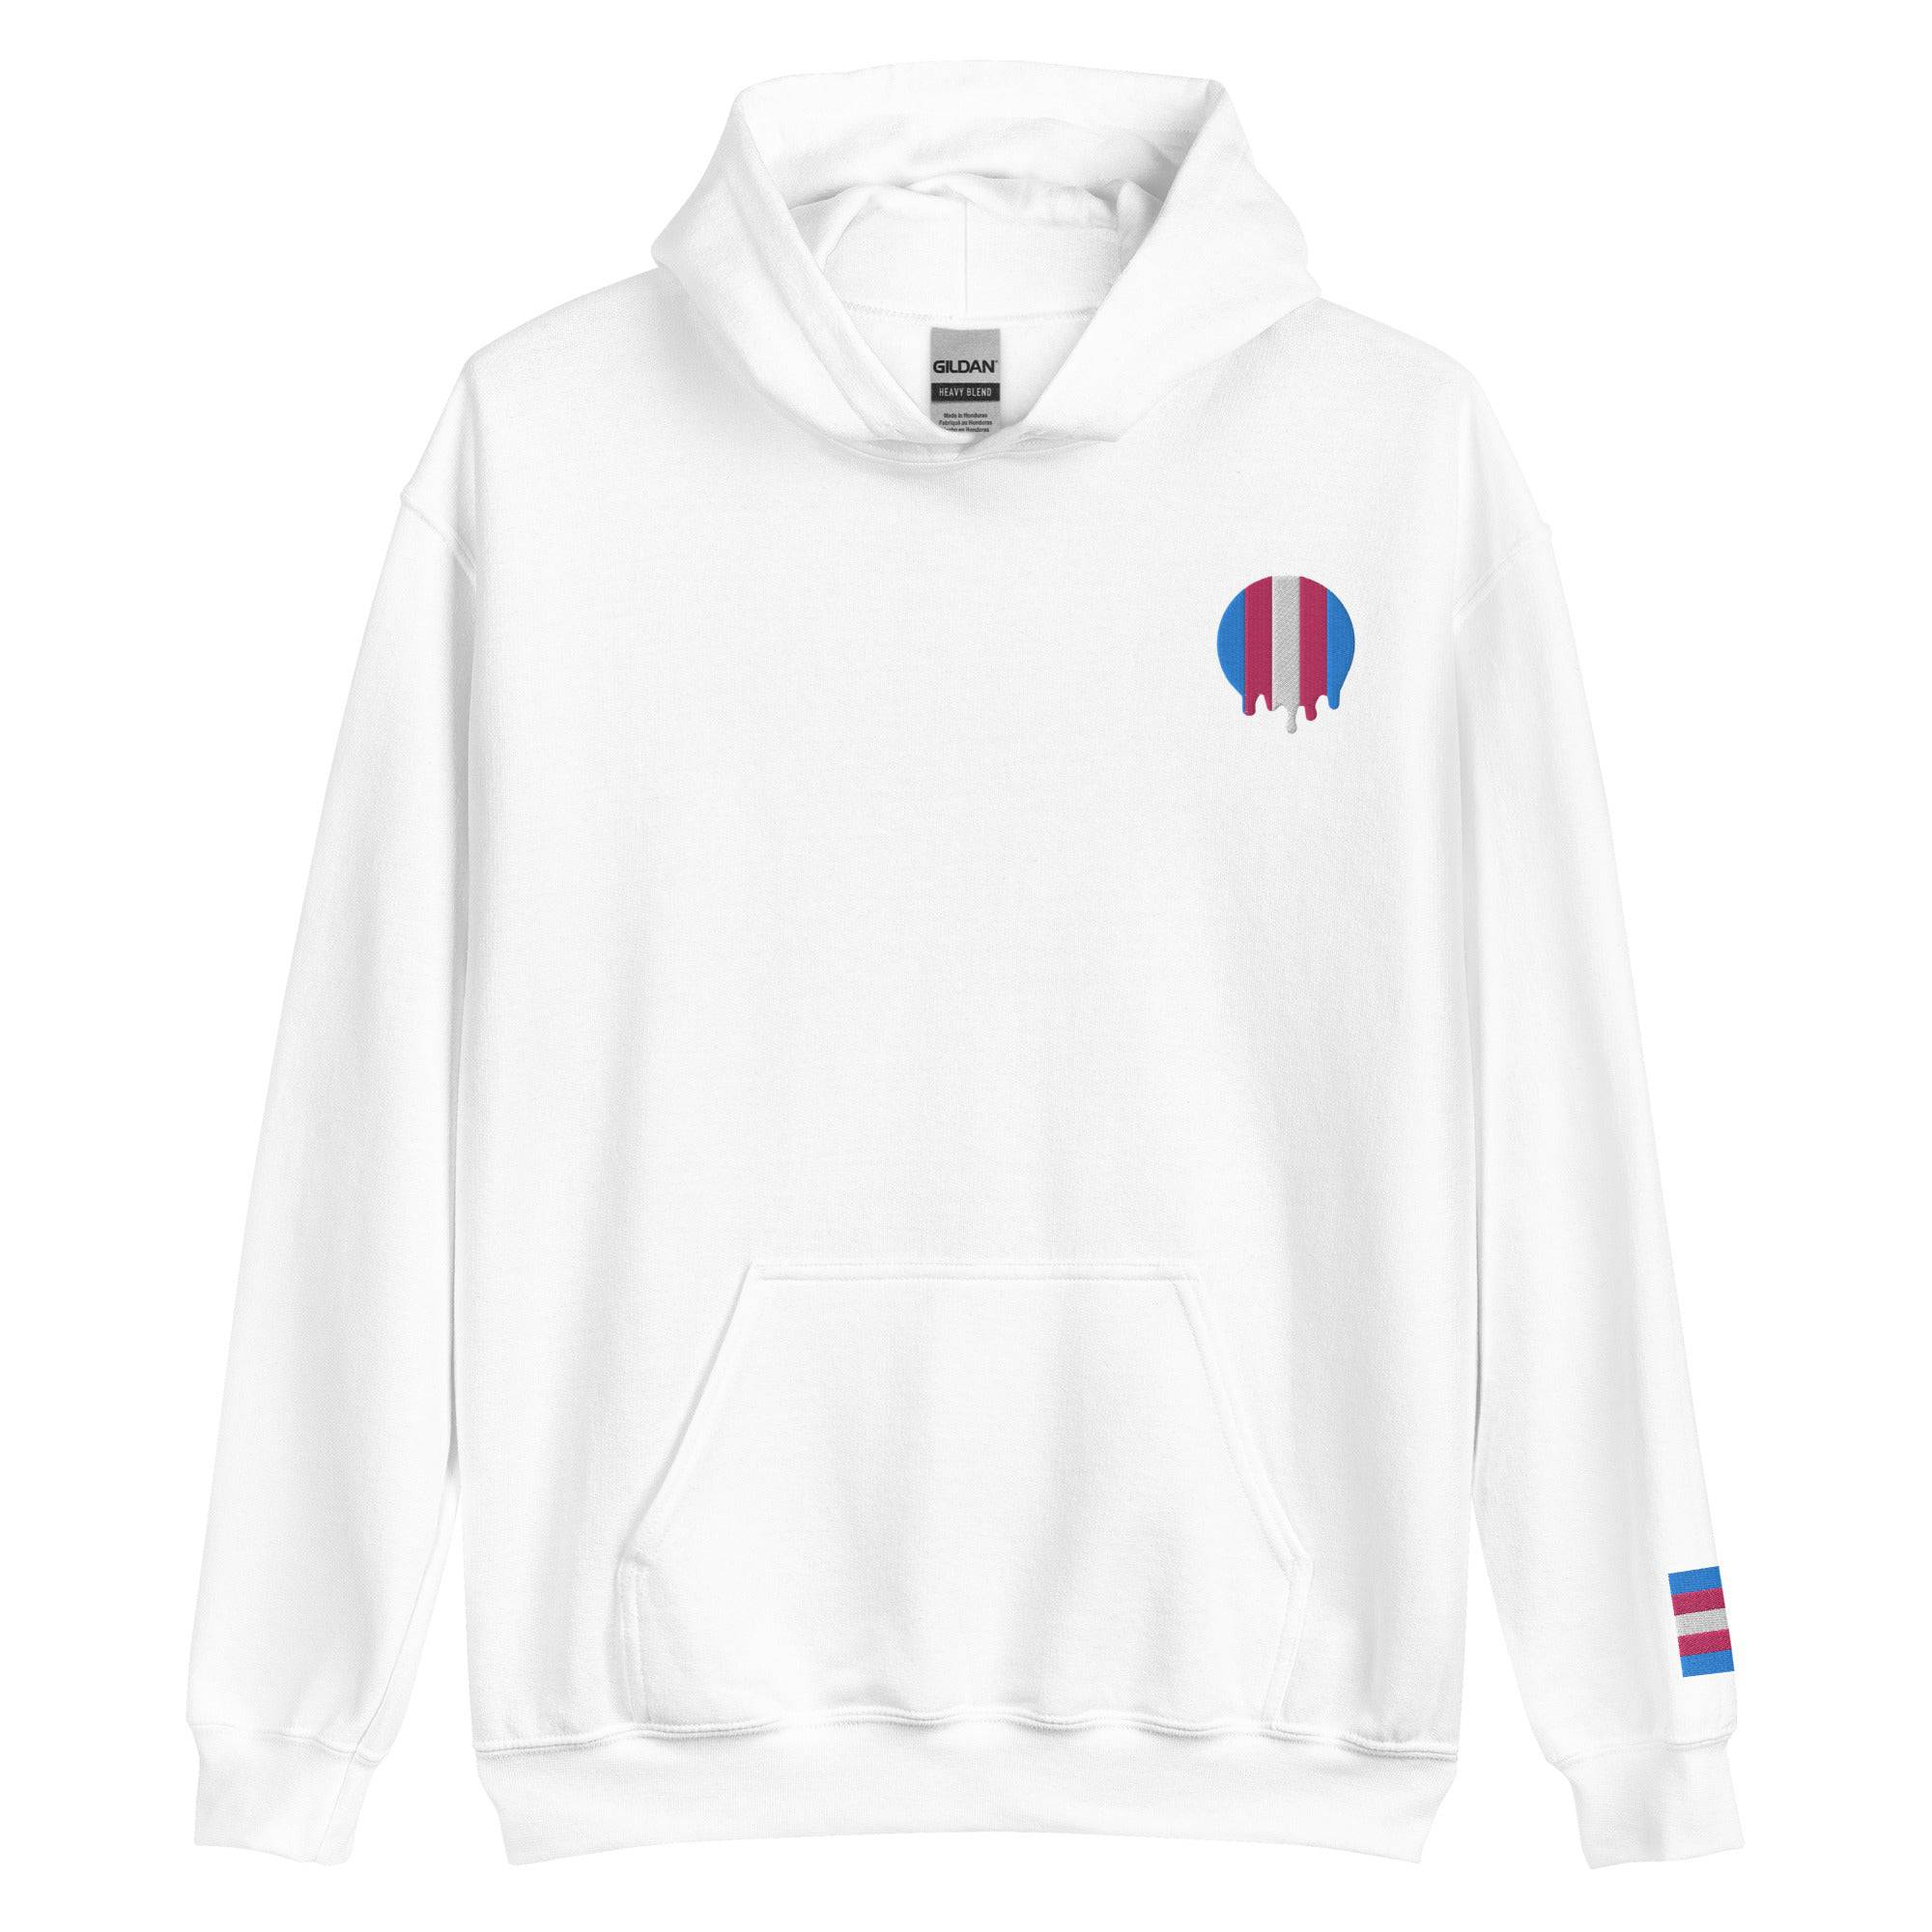 Premium Melting Trans Pride Embroidered Hoodie - Rose Gold Co. Shop